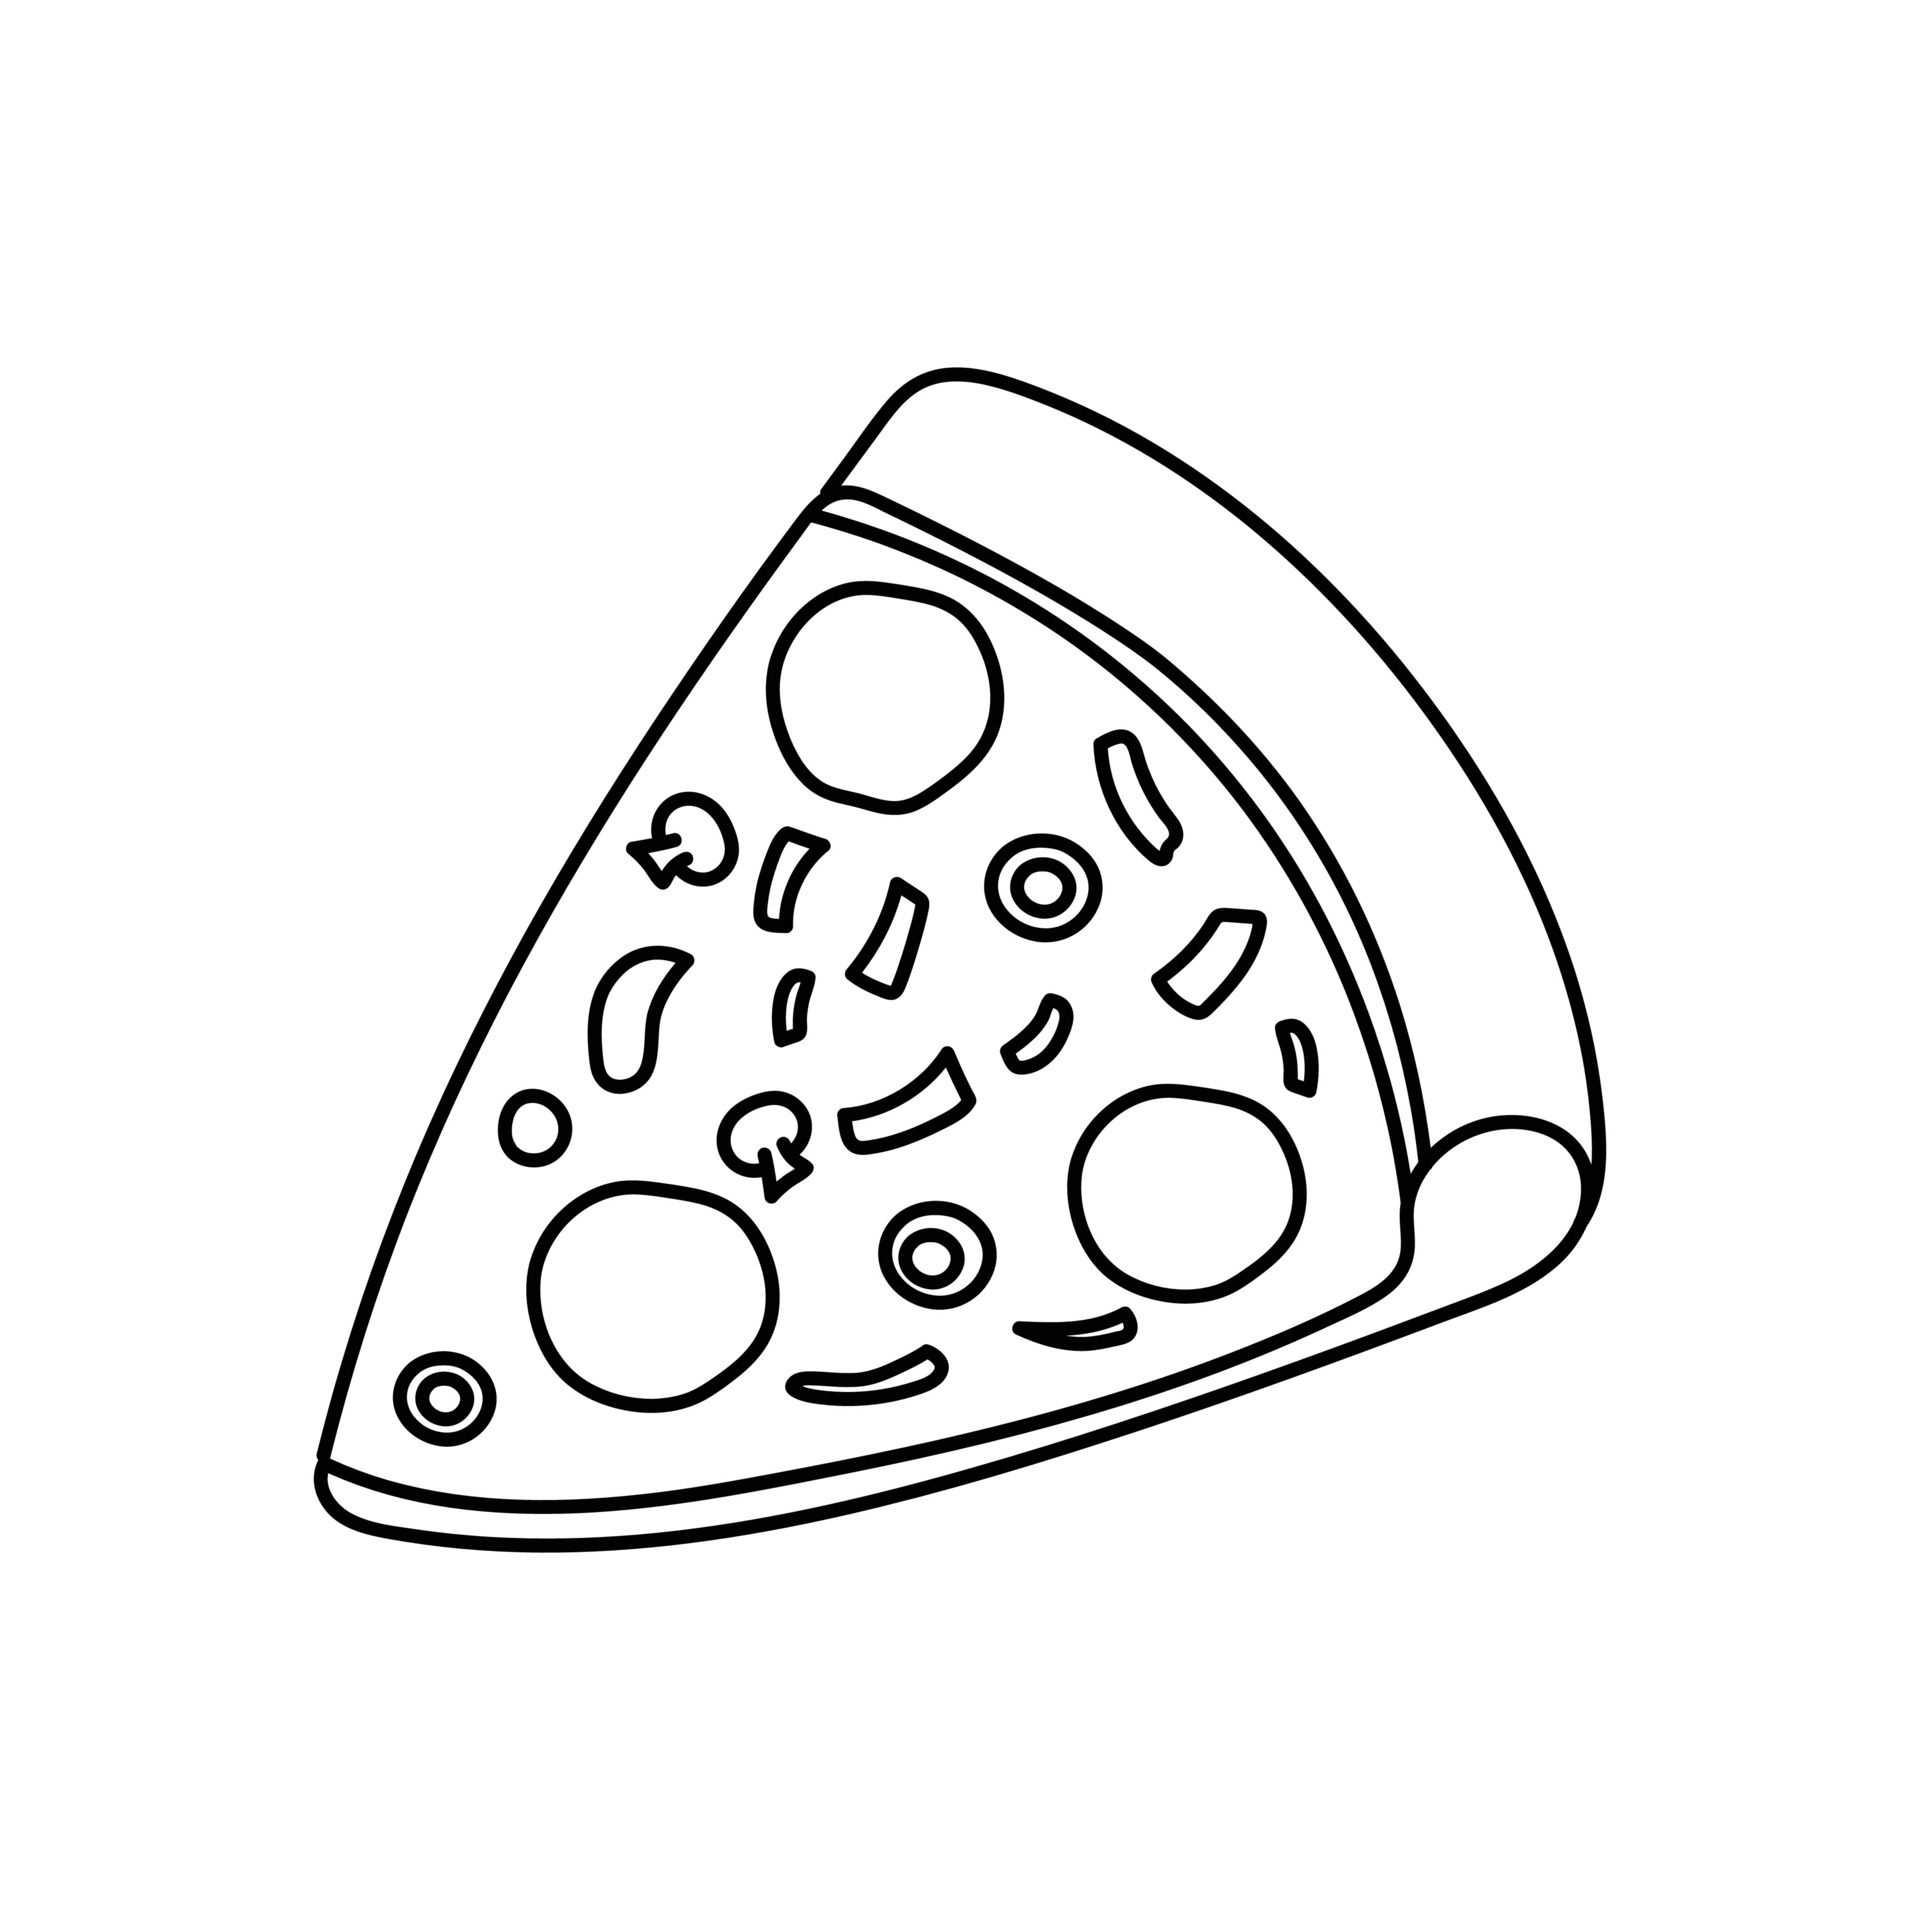 265 Square Pizza Sketch Images, Stock Photos & Vectors | Shutterstock